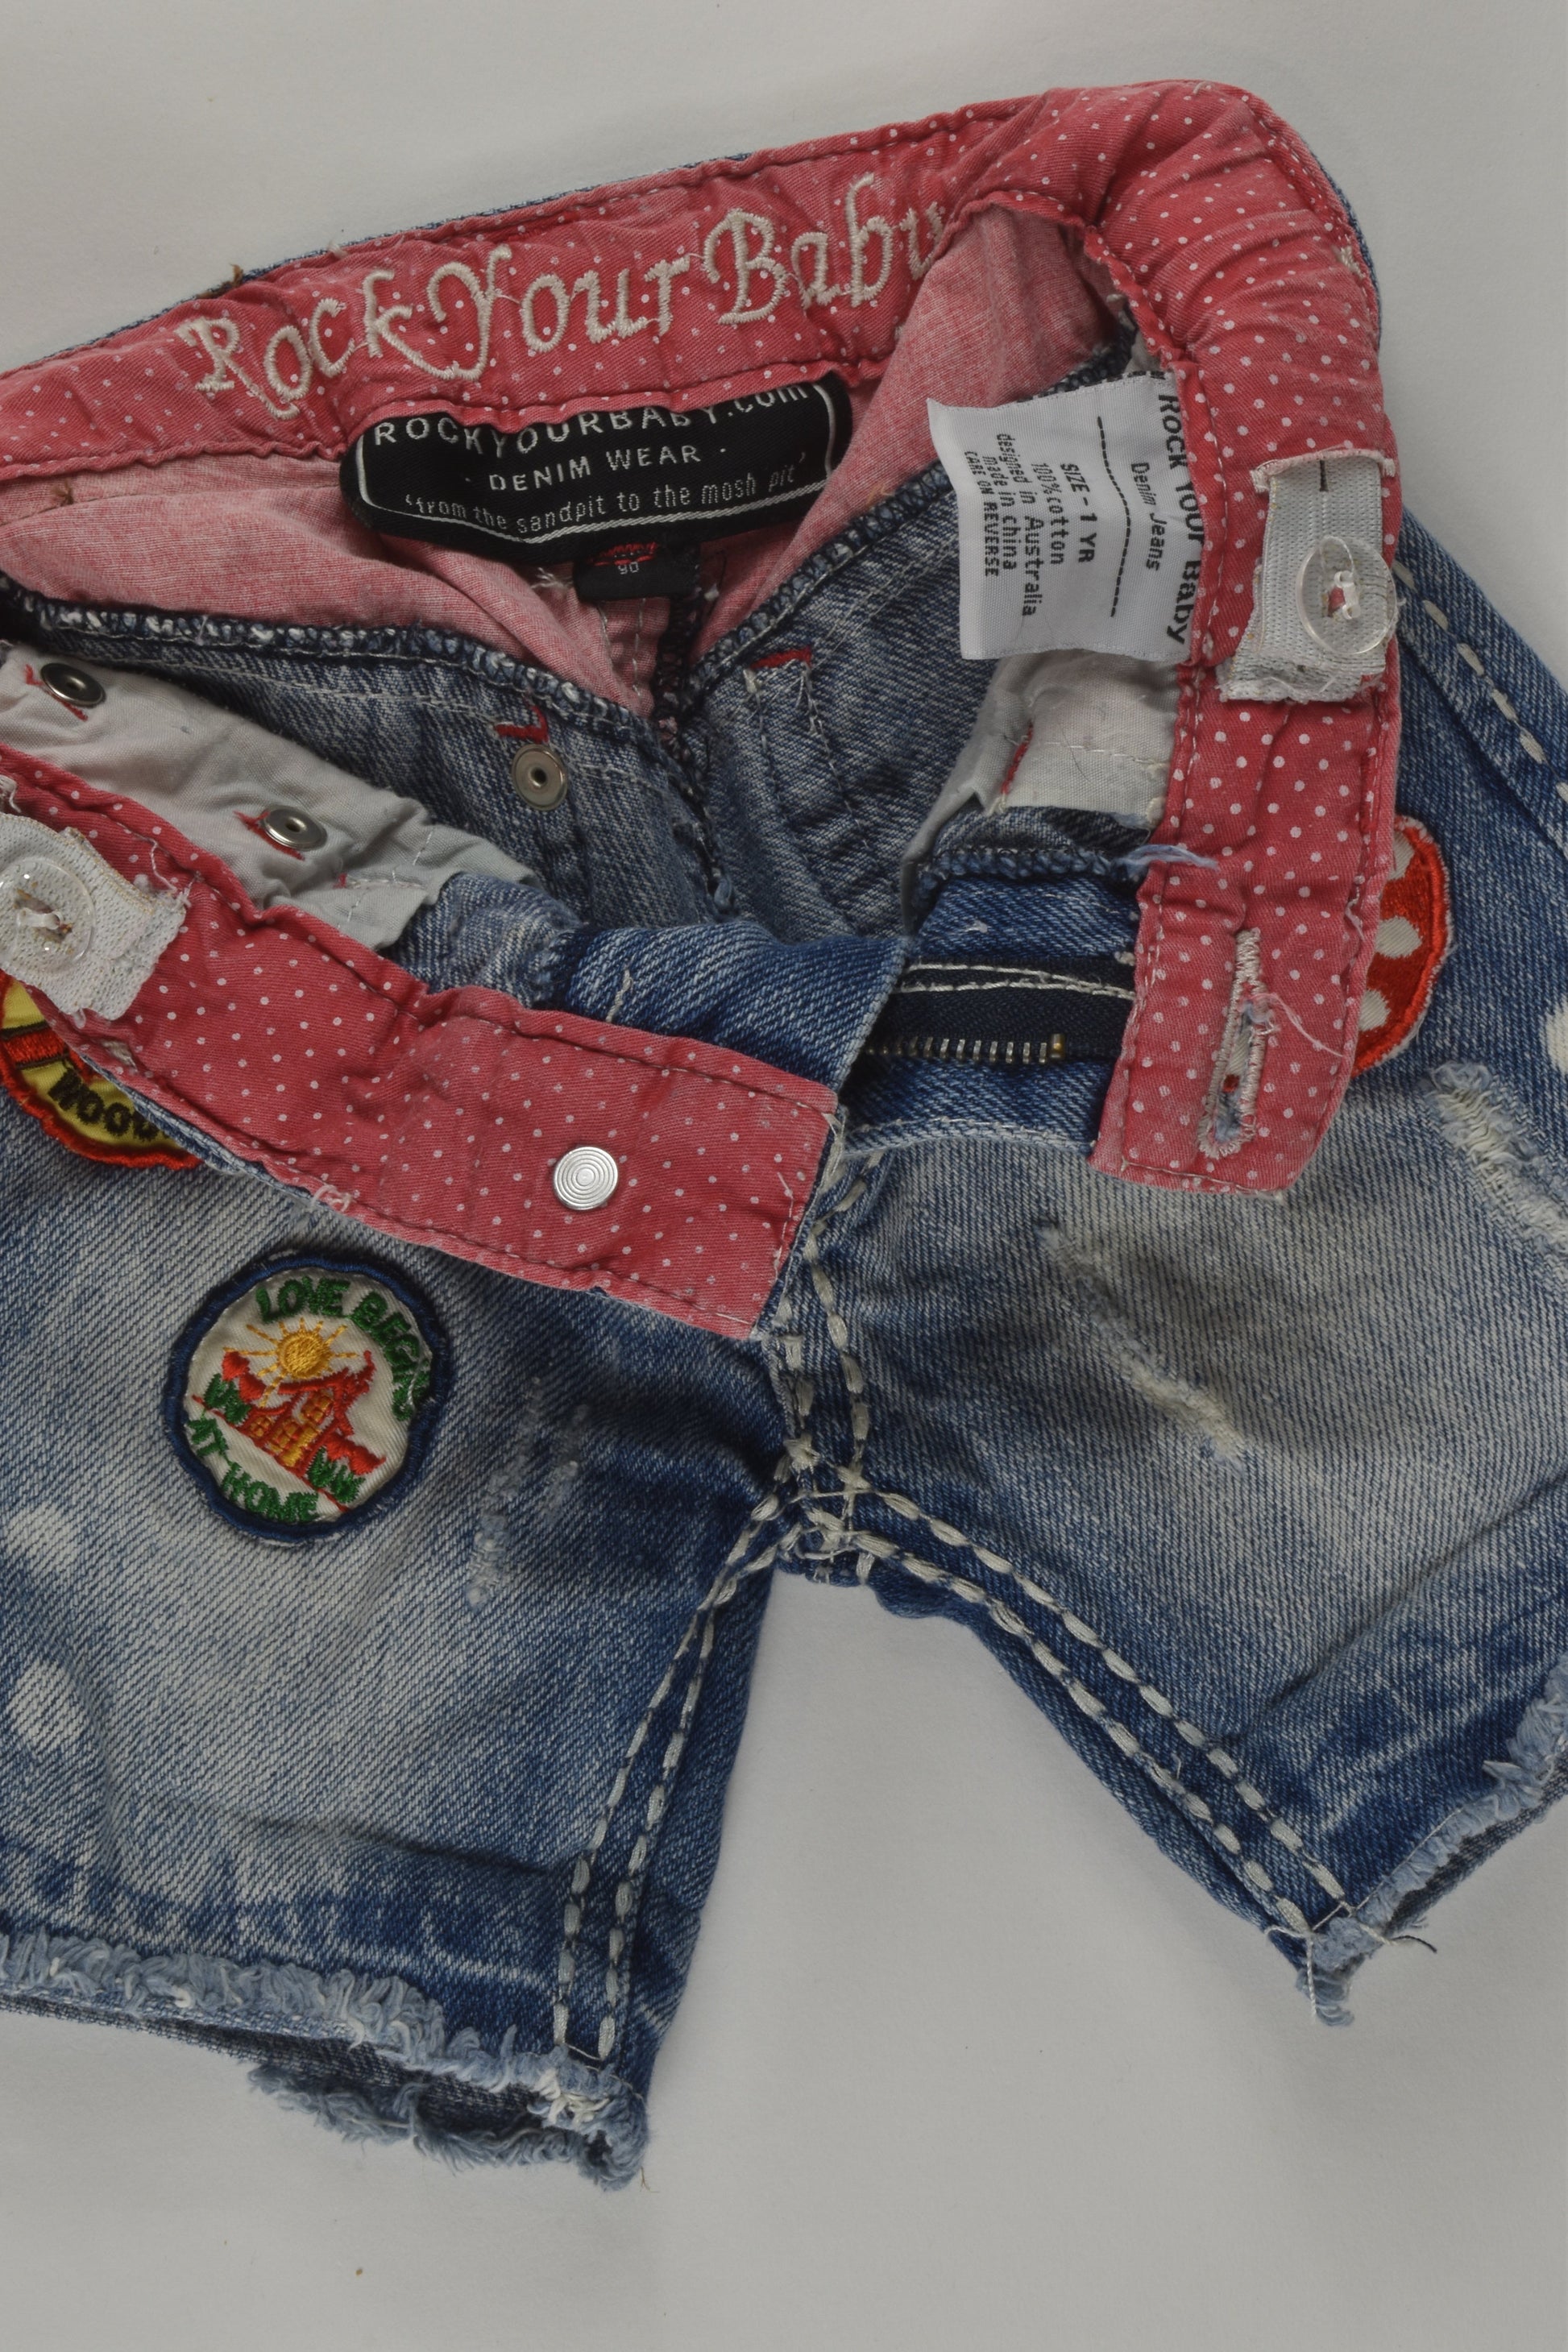 Rock Your Baby Size 1 Denim Shorts